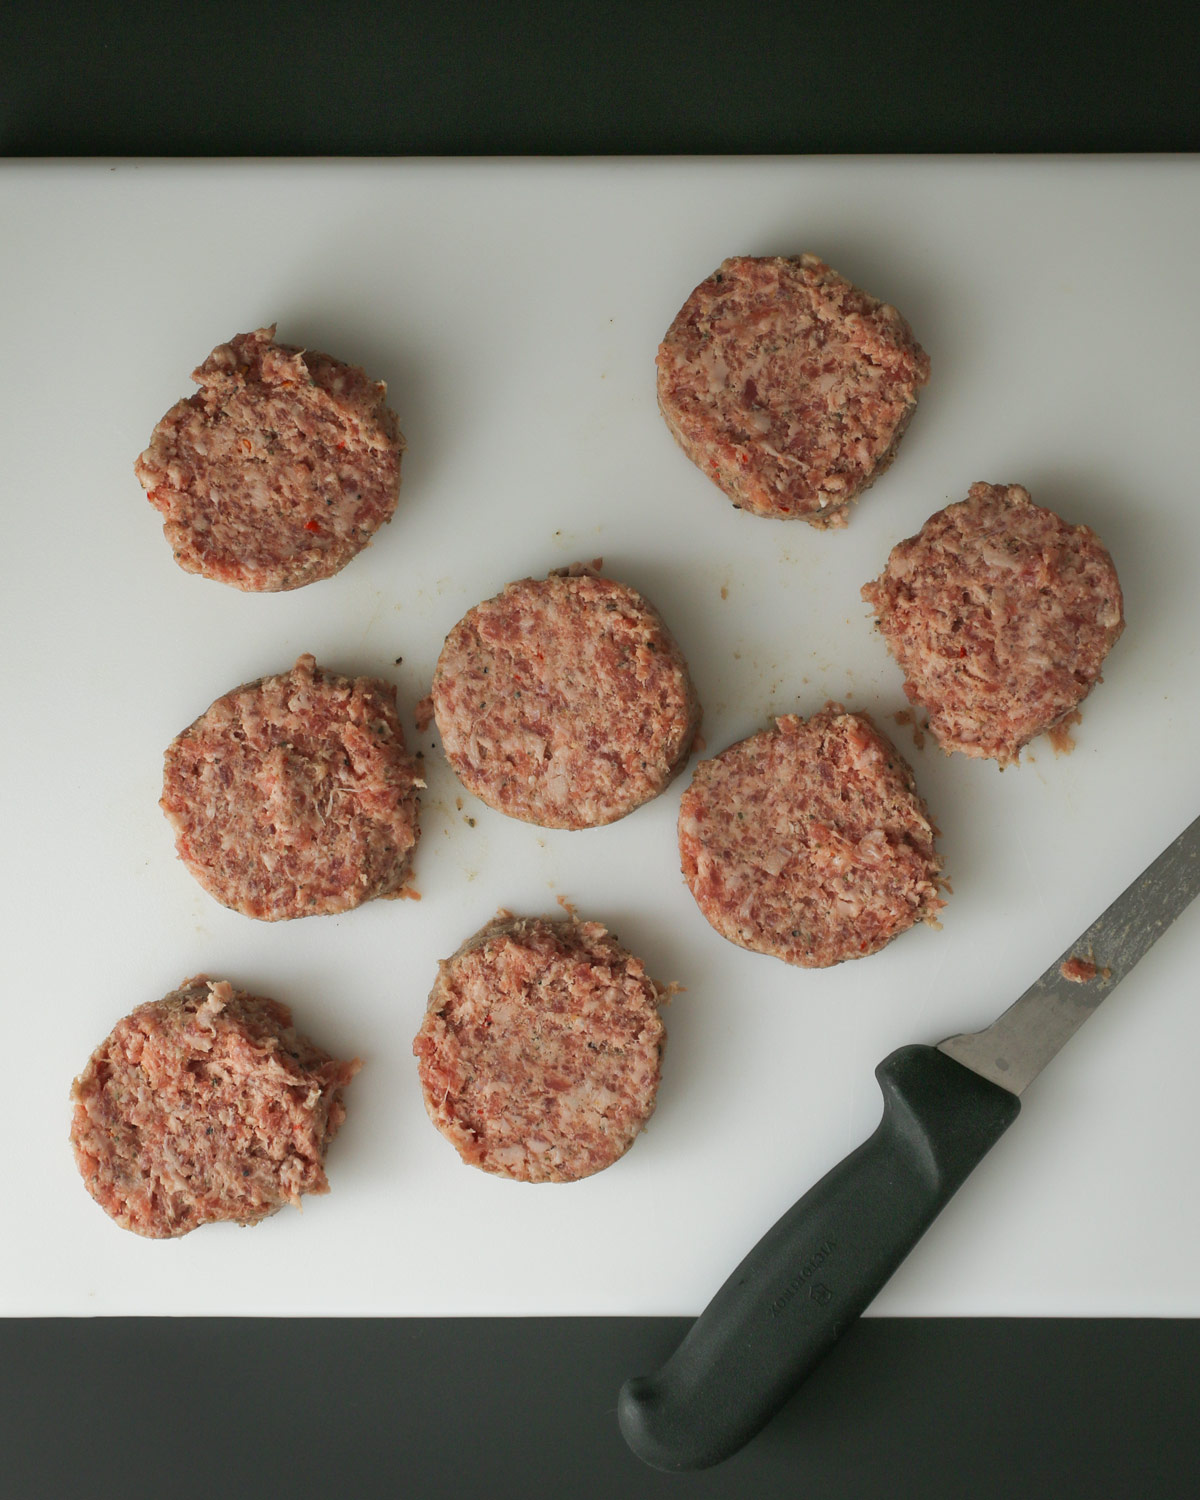 eight sausage patties on cutting board with knife nearby.